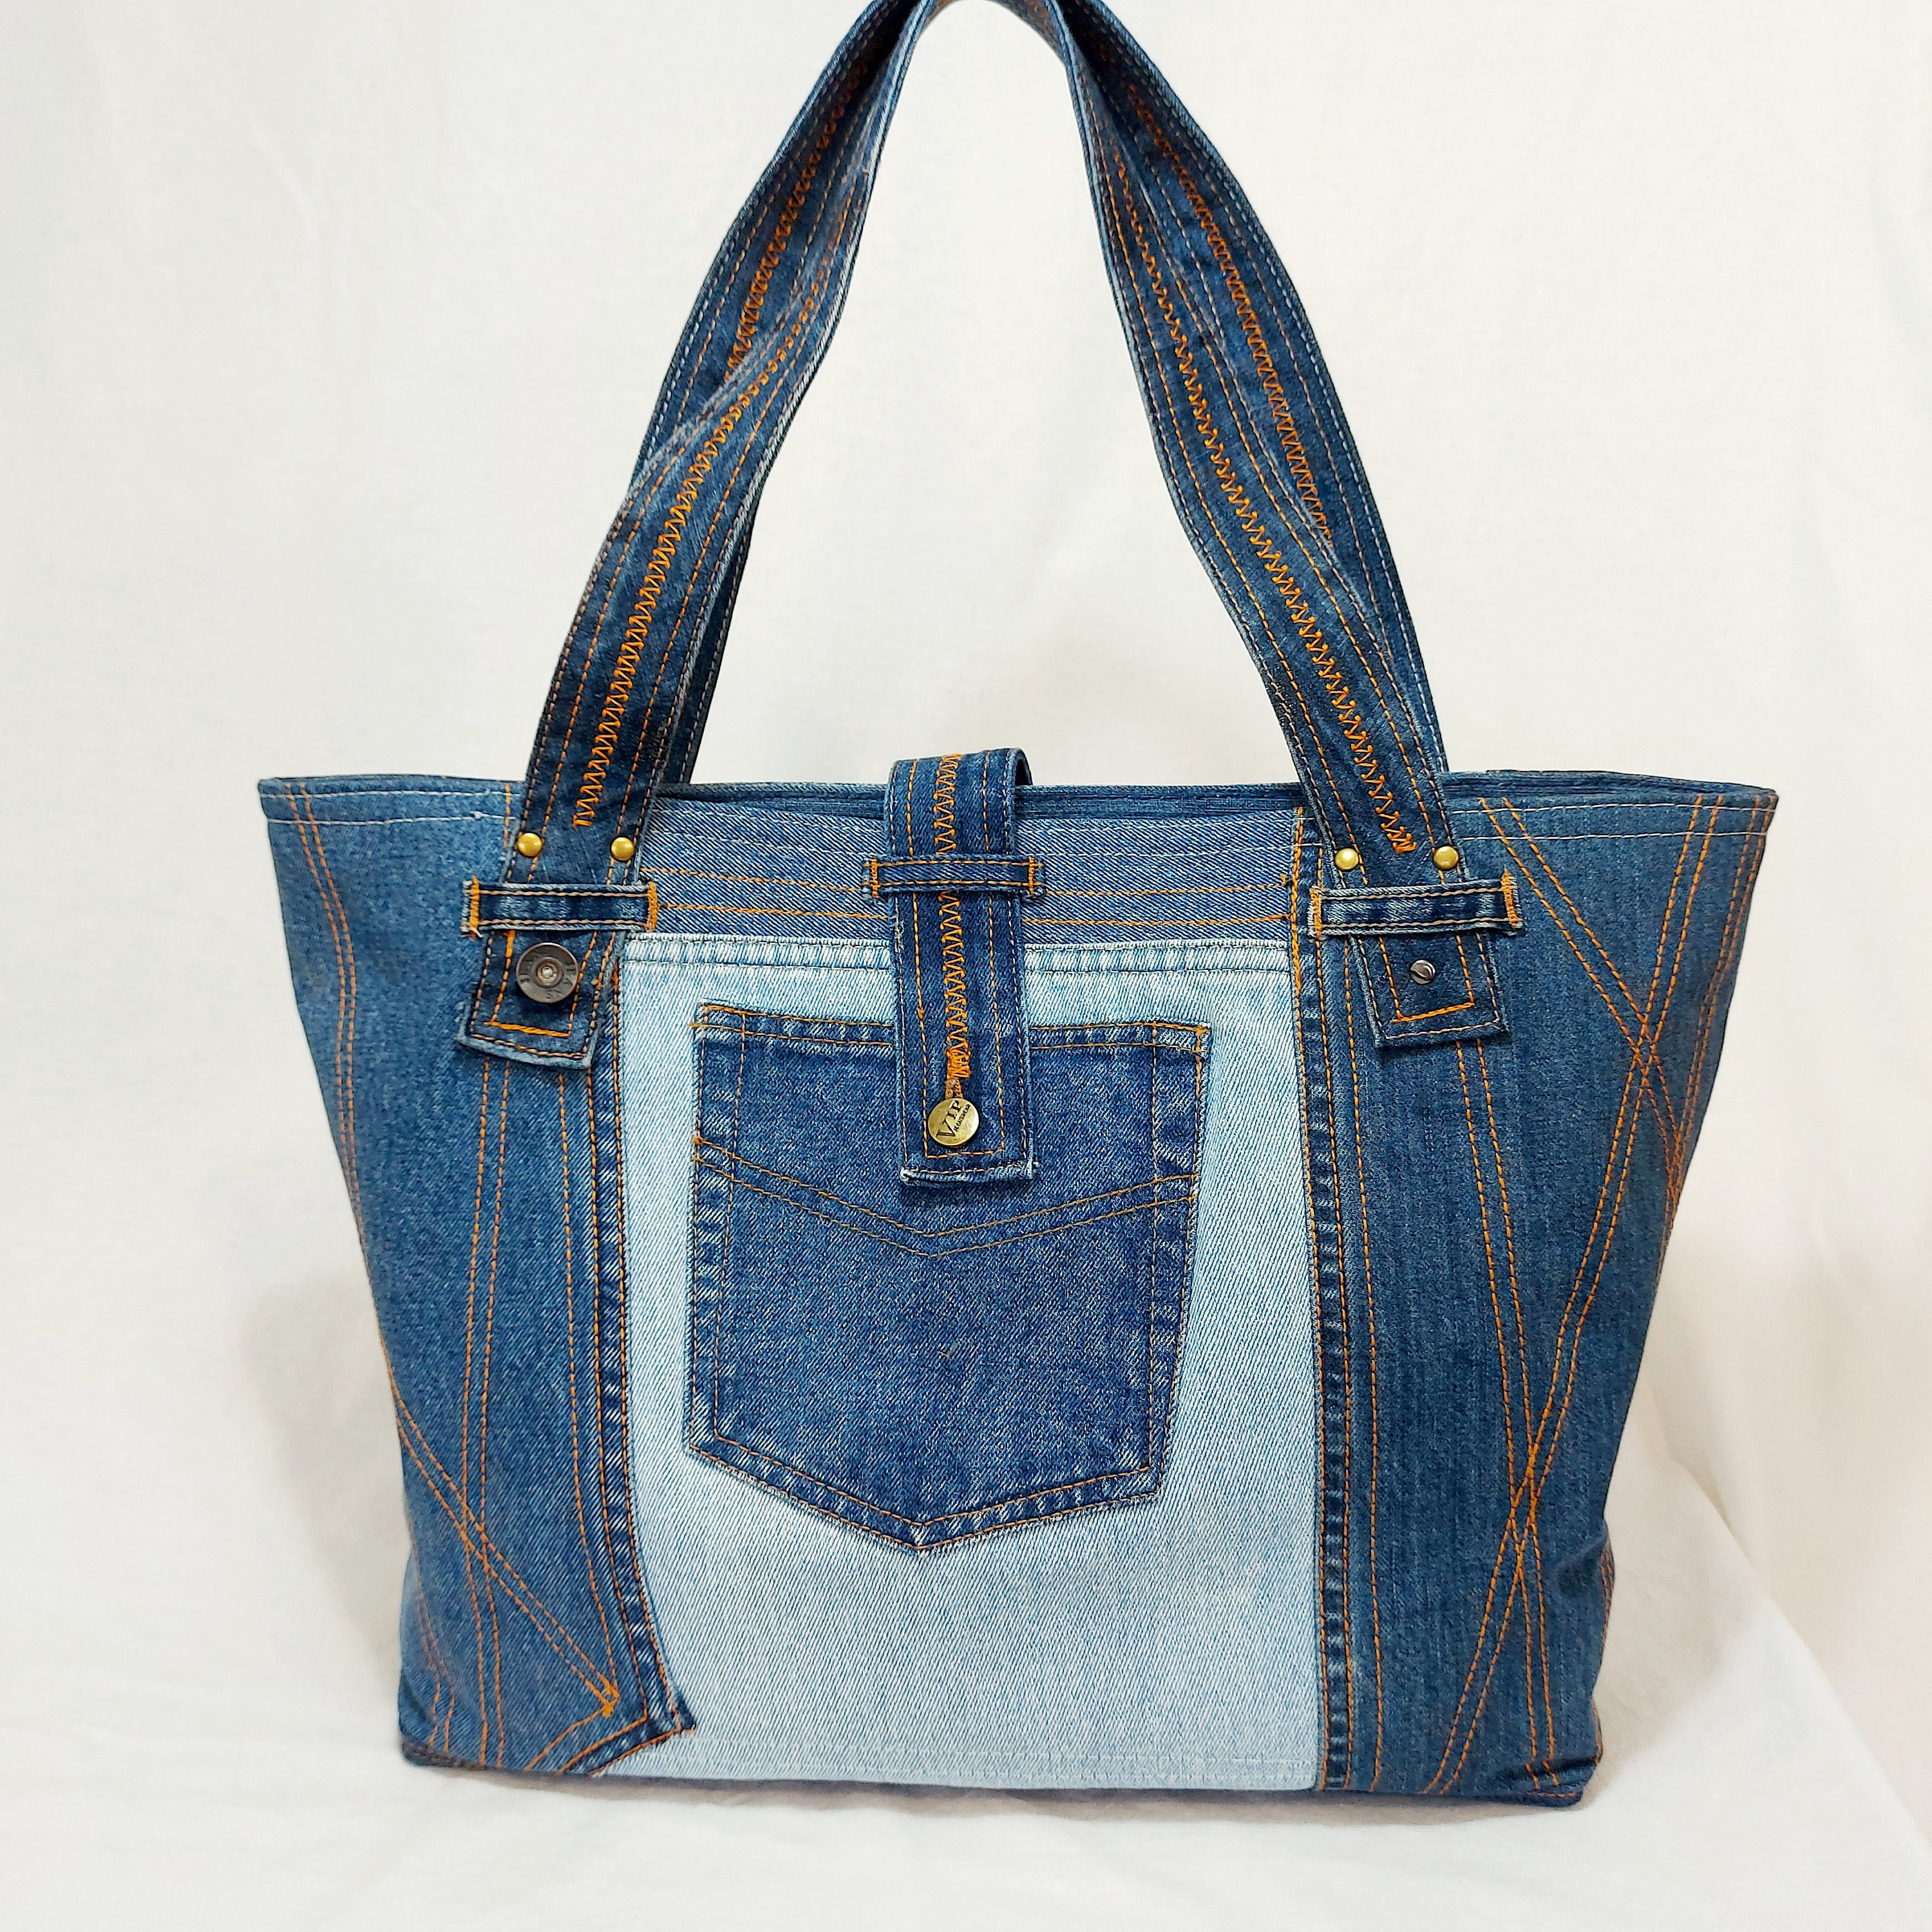 Hand Crafted Large Denim Tote Bag Made of Pre-loved Jeans - Etsy